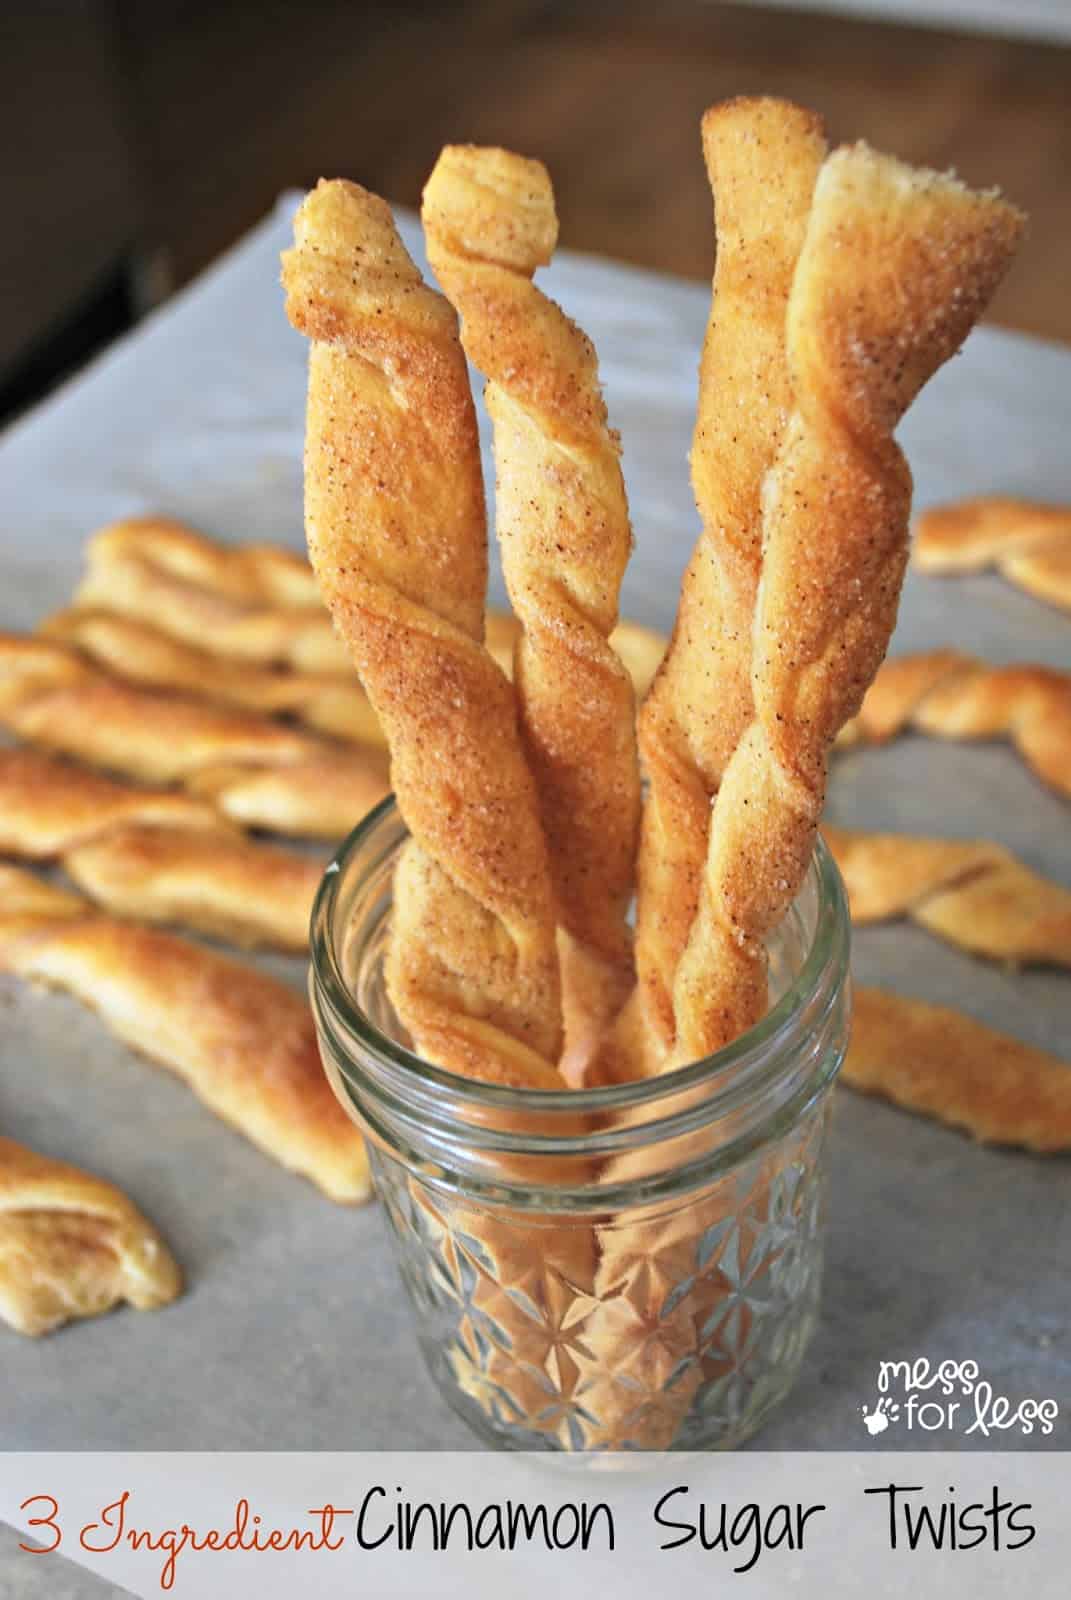 3 Ingredient Cinnamon Sugar Twists - These are a cinch to make and will make your house smell amazing!